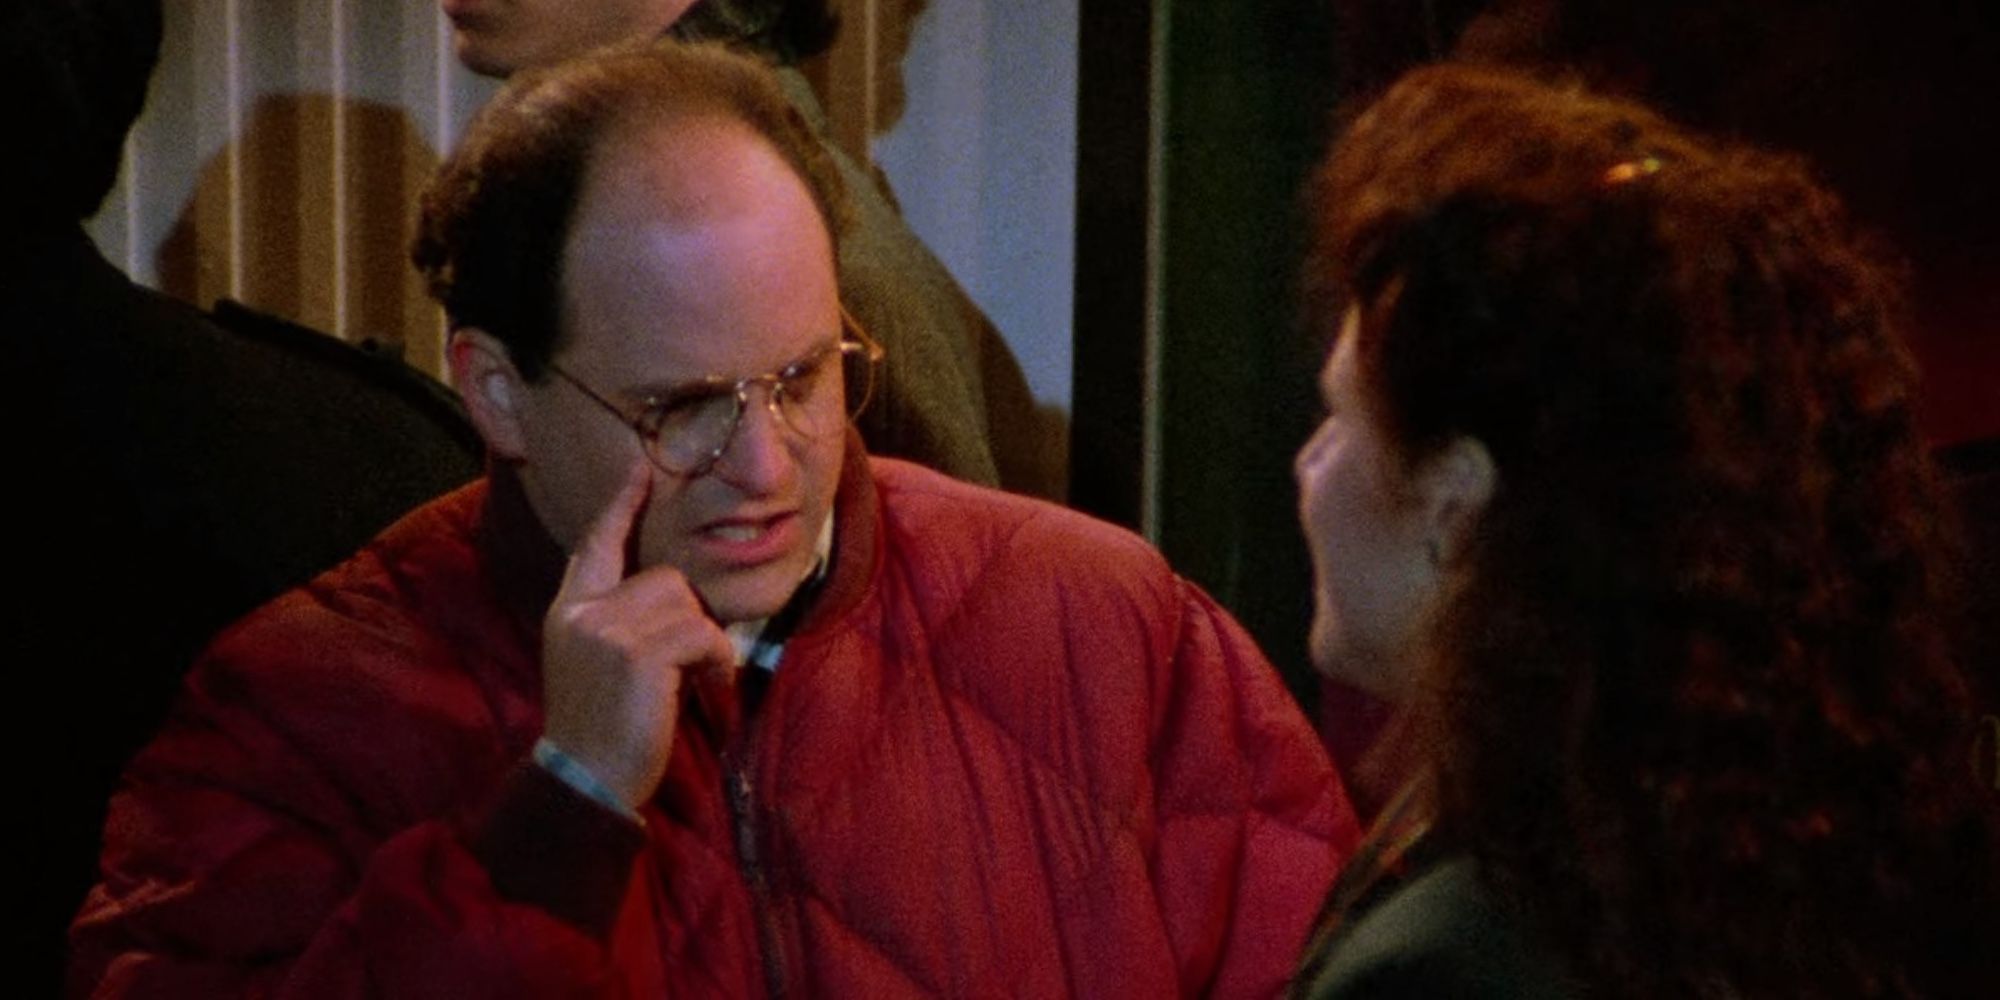 Seinfeld 10 Things About Elaine That Have Aged Poorly